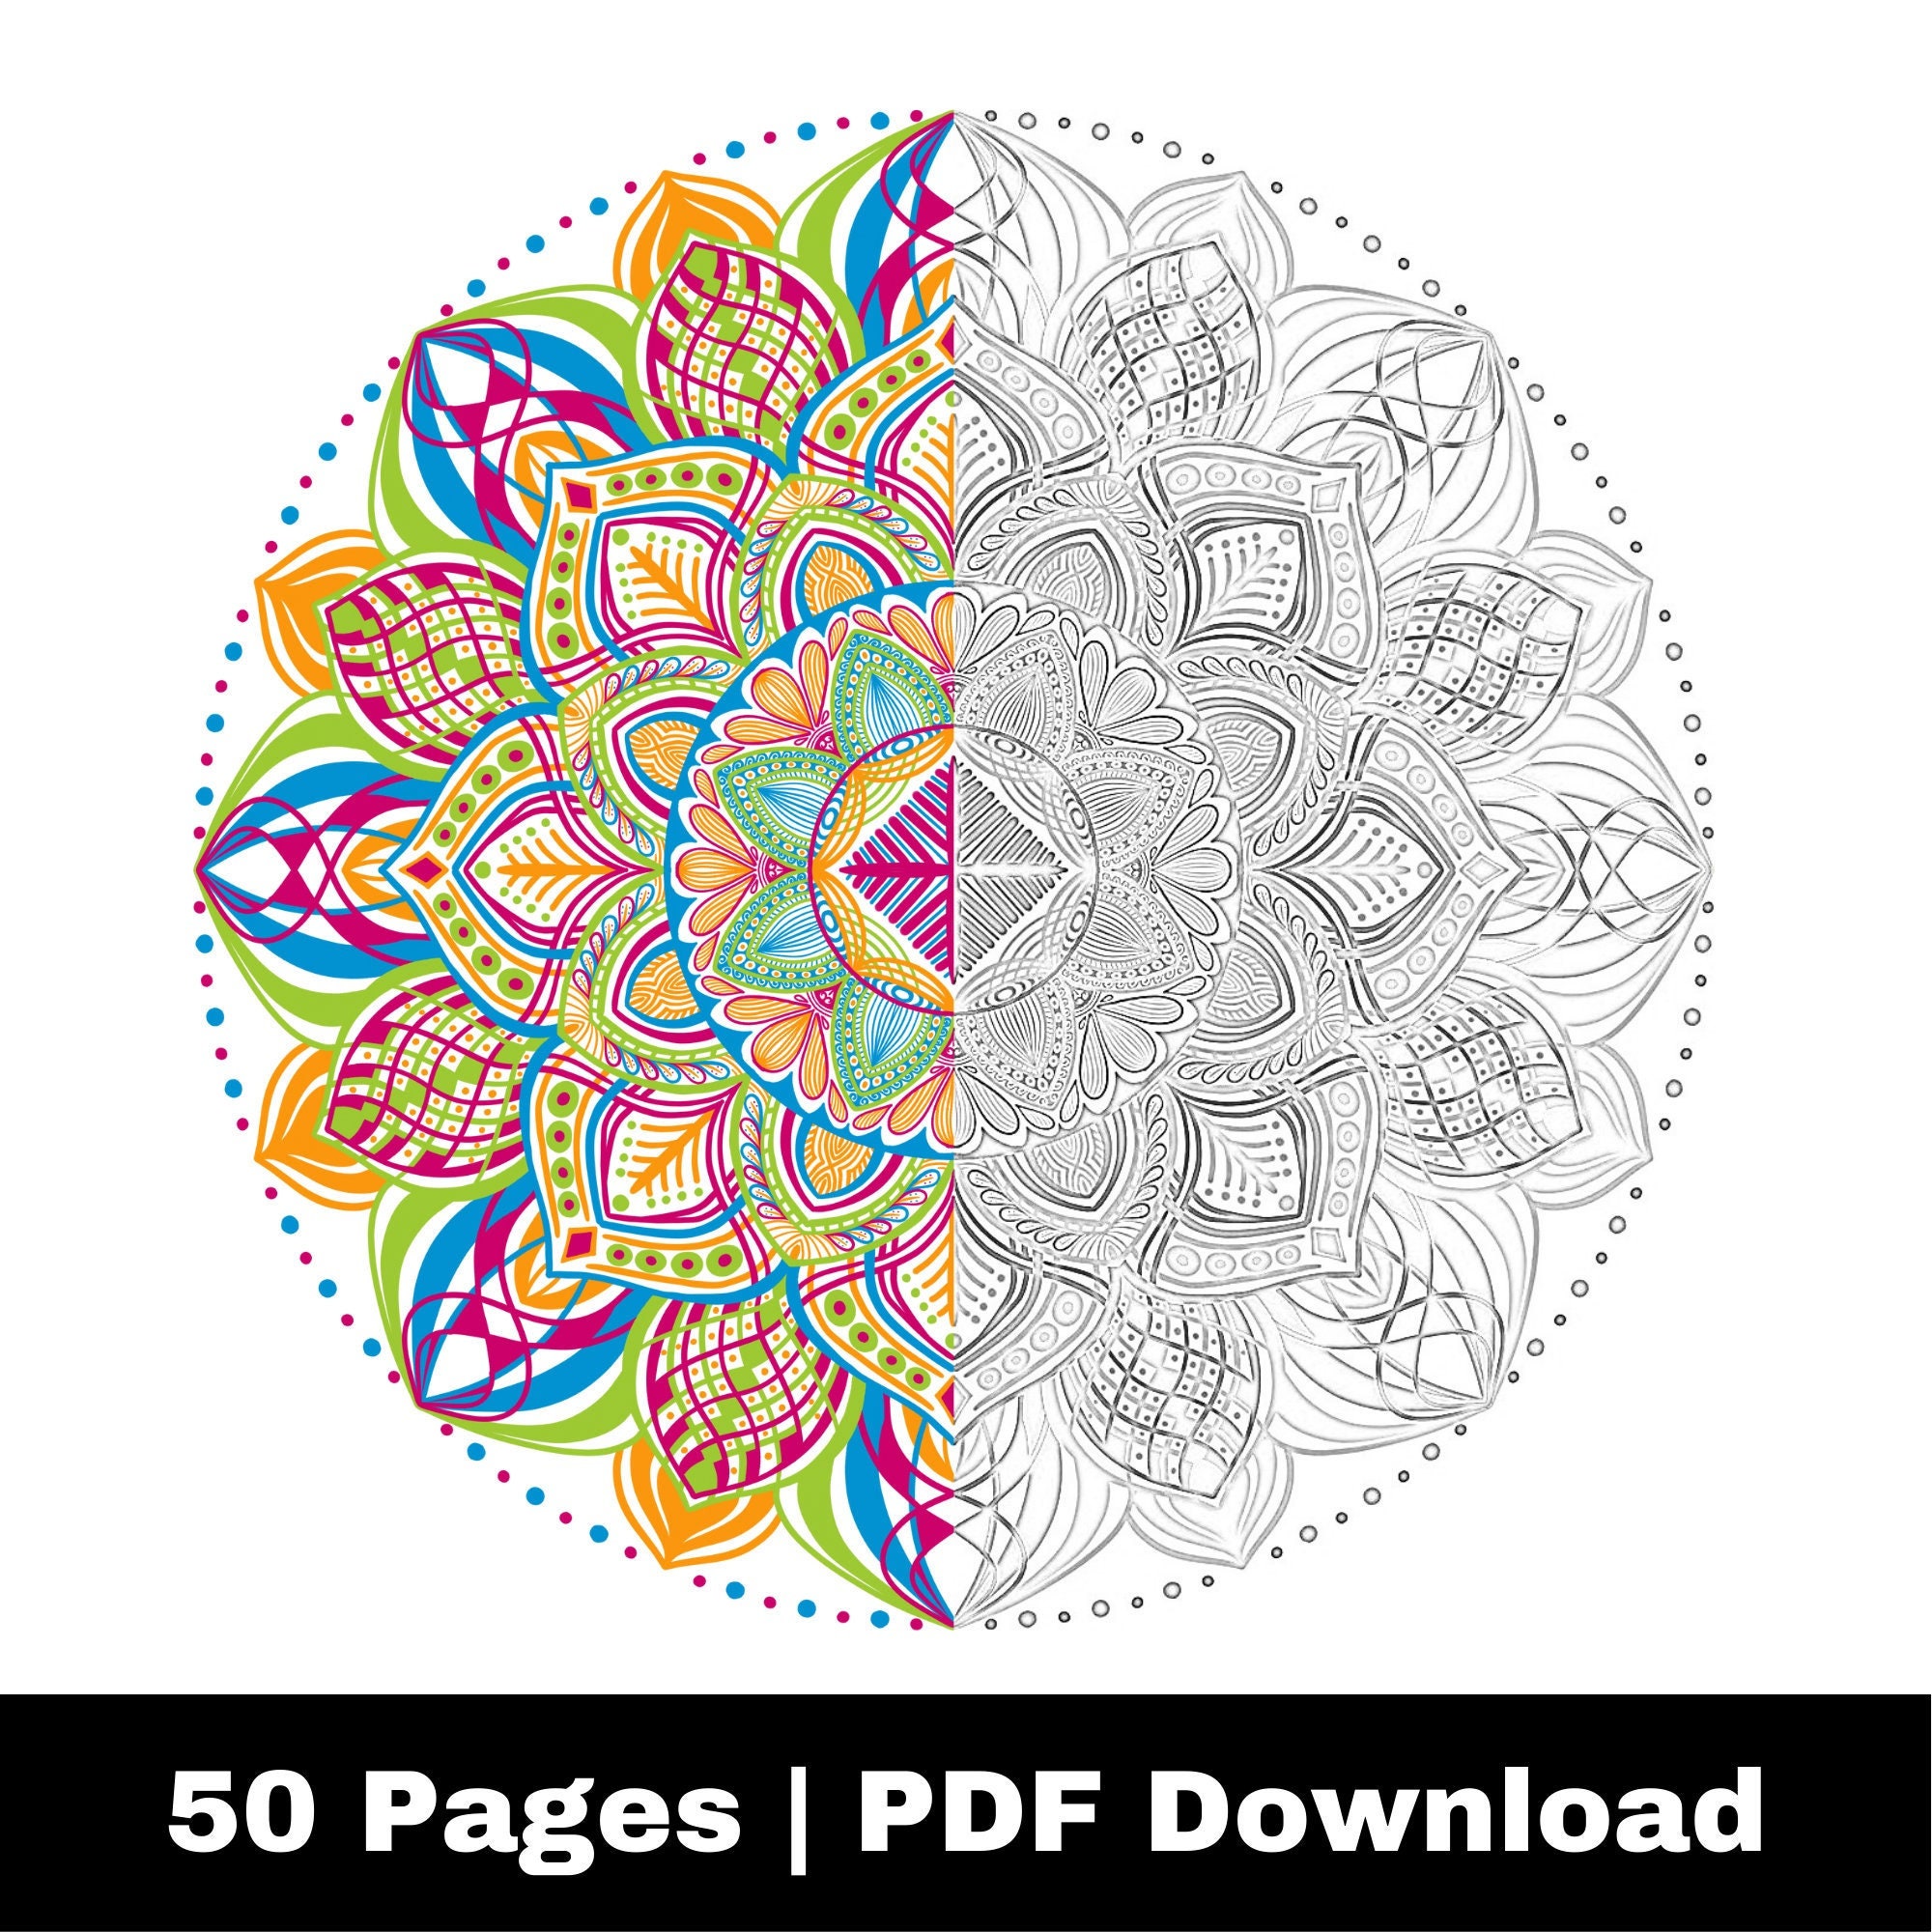 Alphabet | 52 Letters | Adult Coloring Book | Large Size | 2 Patterns per Alphabet: Coloring Book Adult Stress Relief | Zentangle Books for